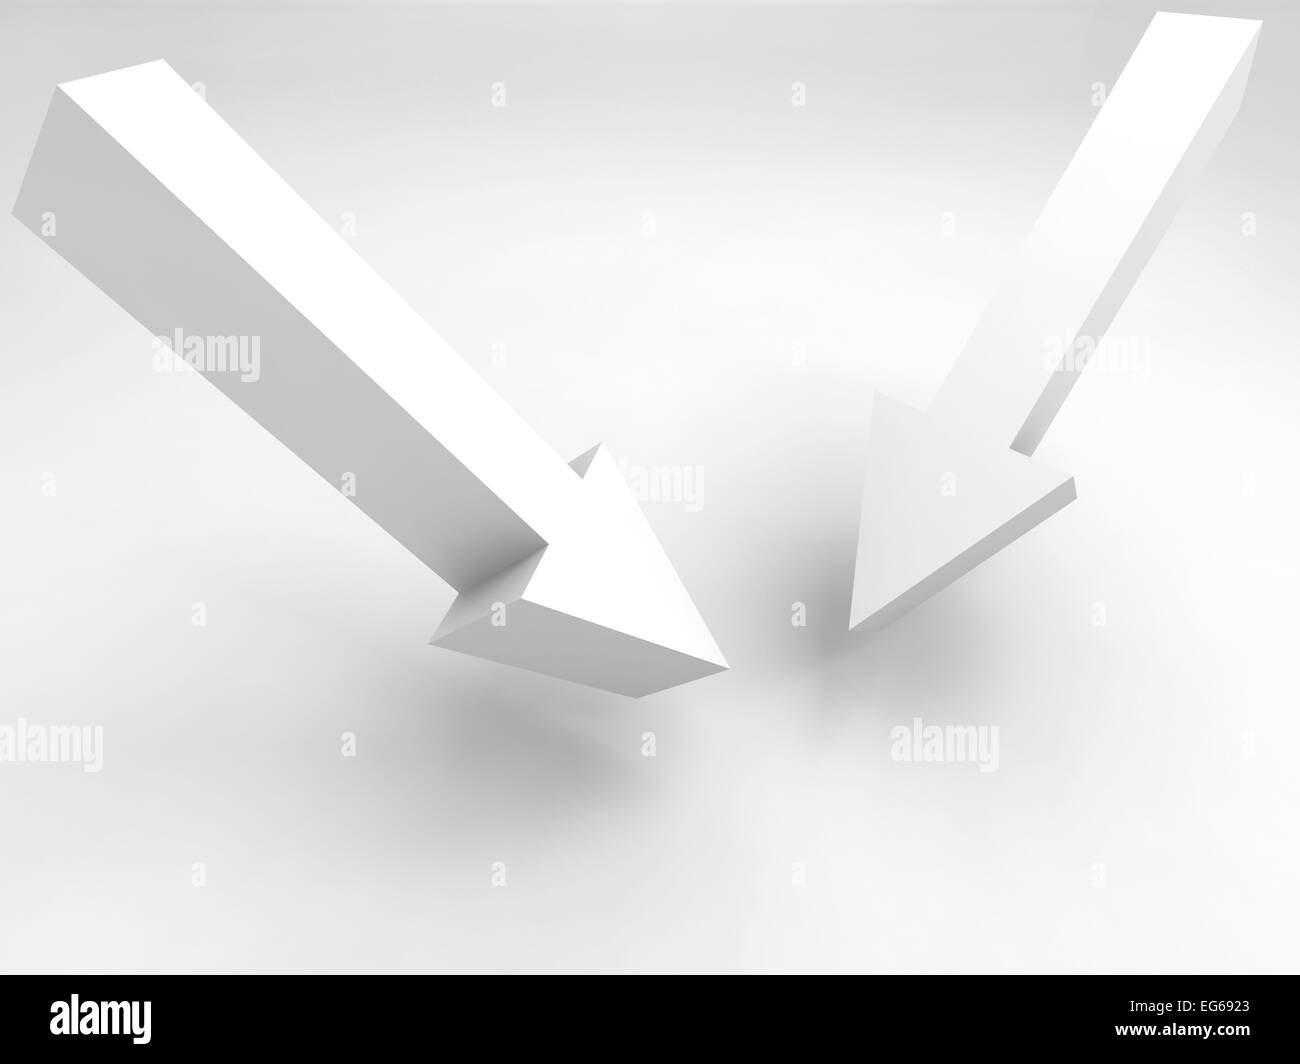 Abstract 3d illustration. Two arrow signs and soft shadow Stock Photo